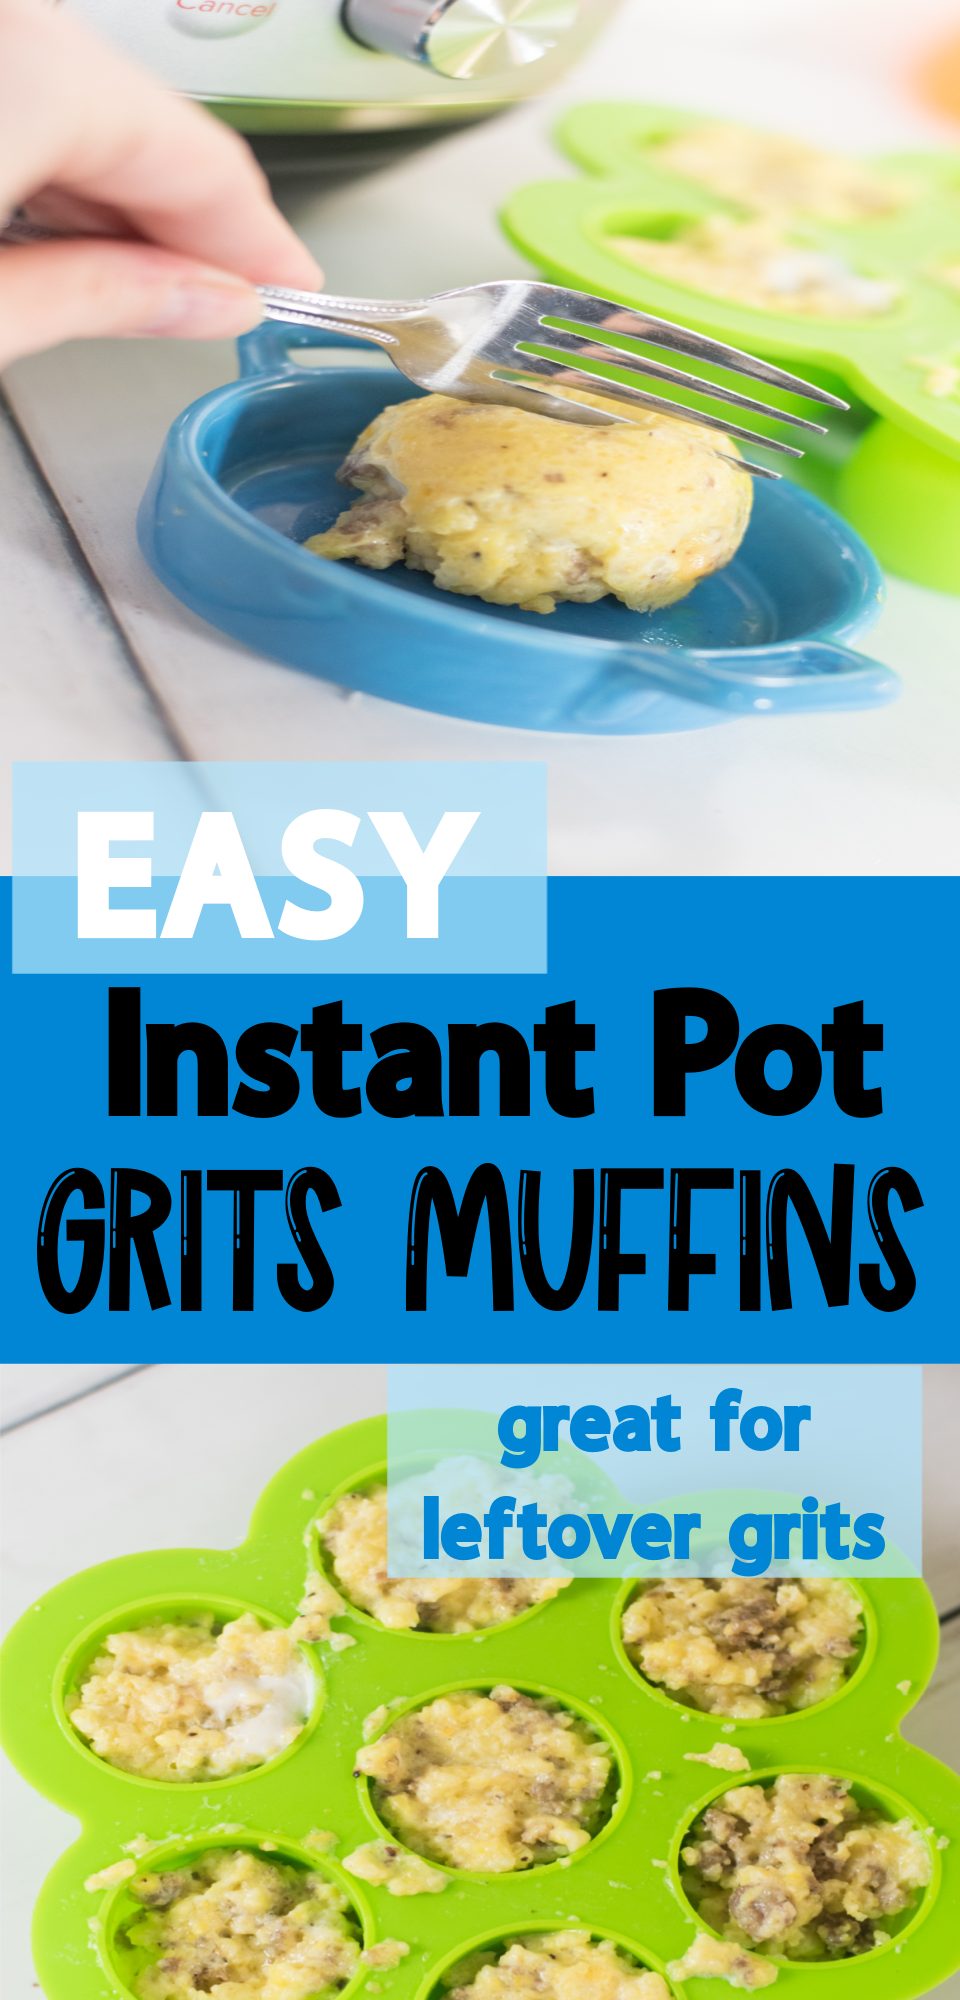 Grits muffins in the Instant Pot are a fun twist on traditional egg bites - you can use leftover grits or make them with a fresh batch. They are packed with flavor from eggs, milk, and sausage, and you can easily adapt them for your own preference and taste.